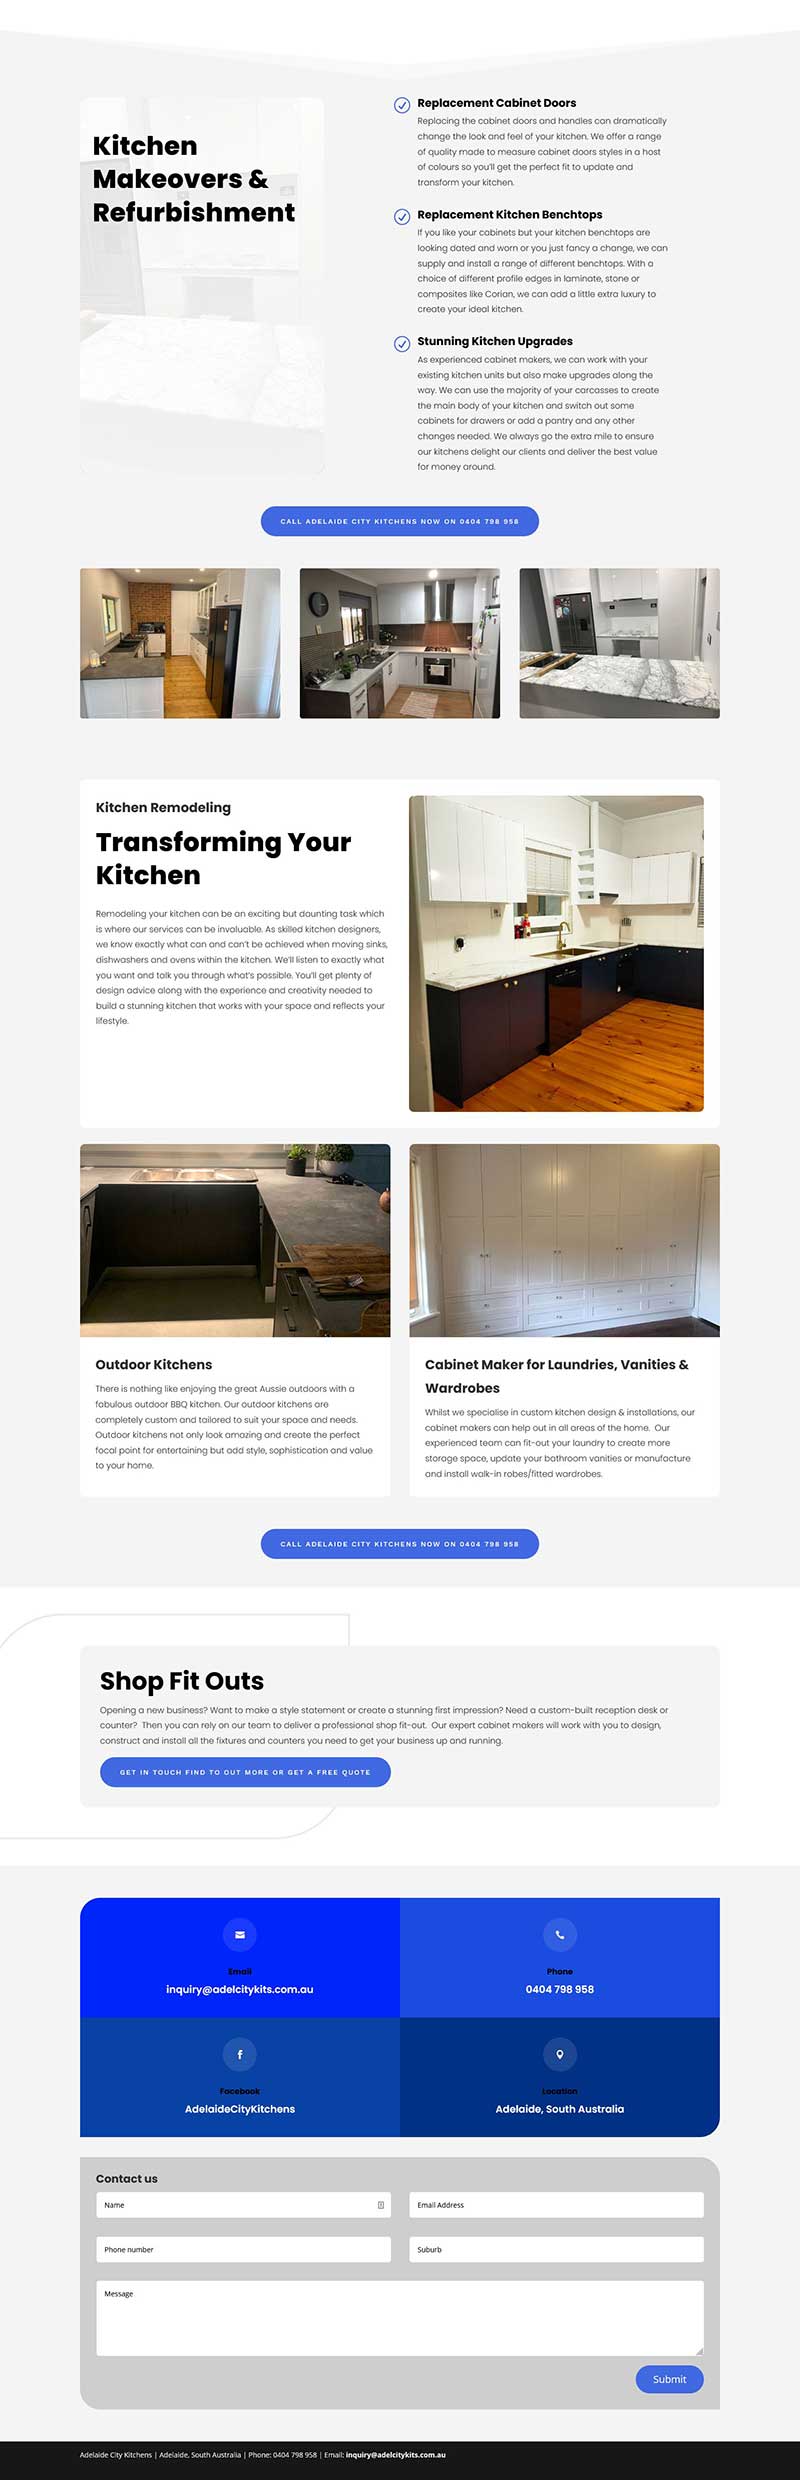 kitchen renovation business in adelaide